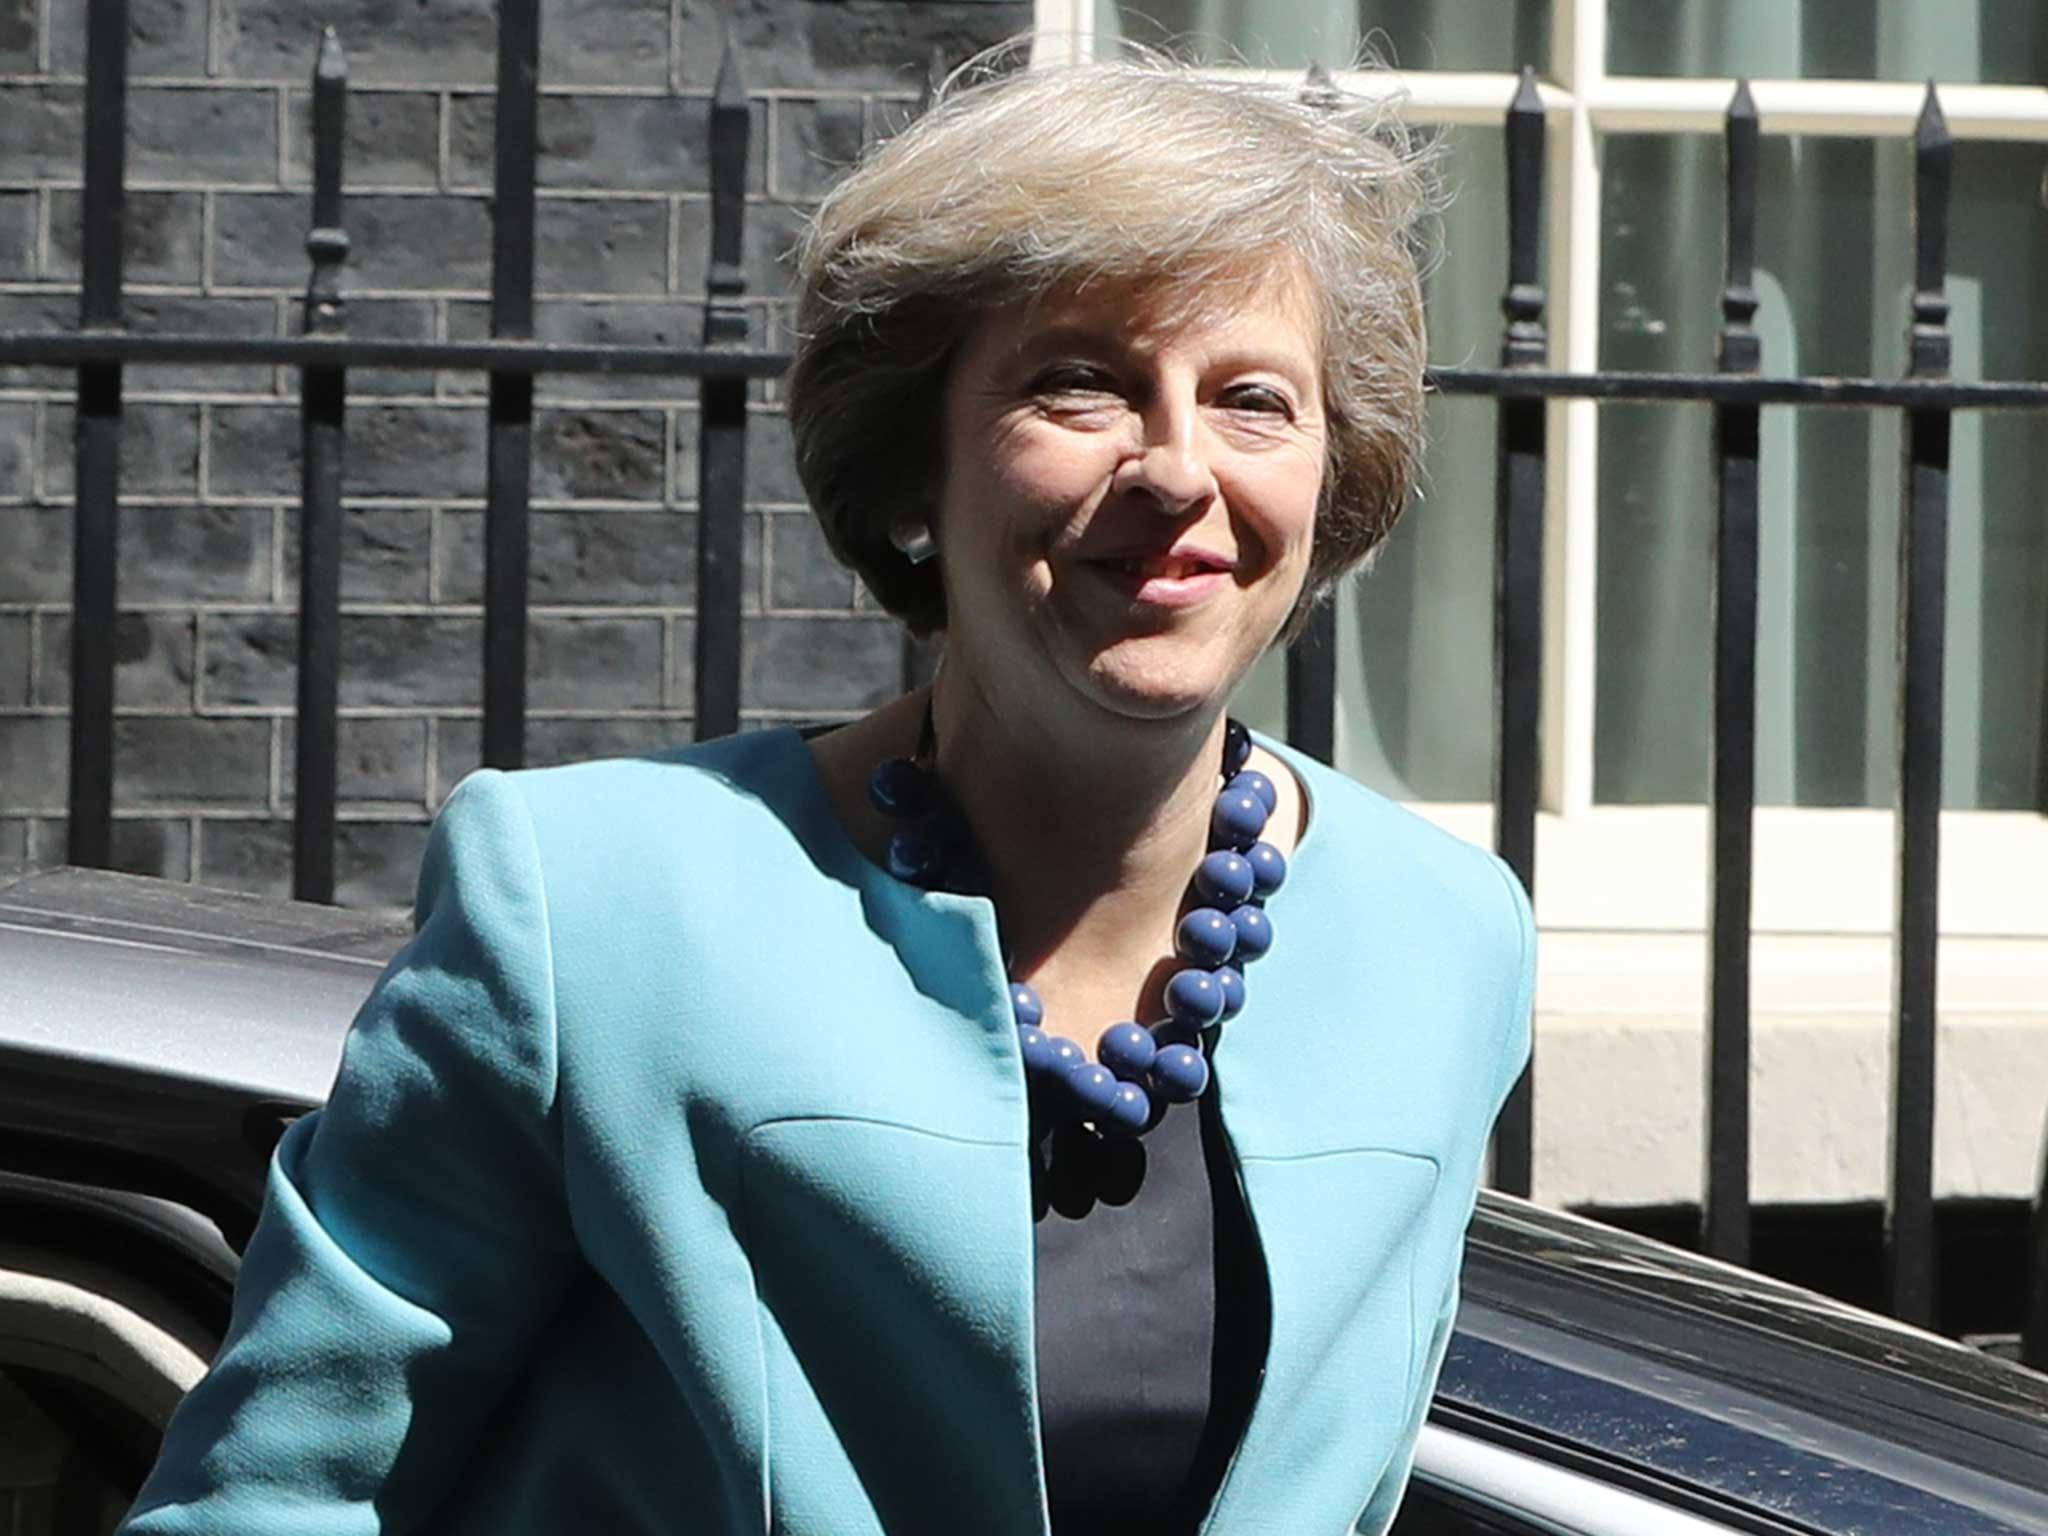 British Prime Minister Theresa May arrives at 10 Downing Street to appoint her cabinet